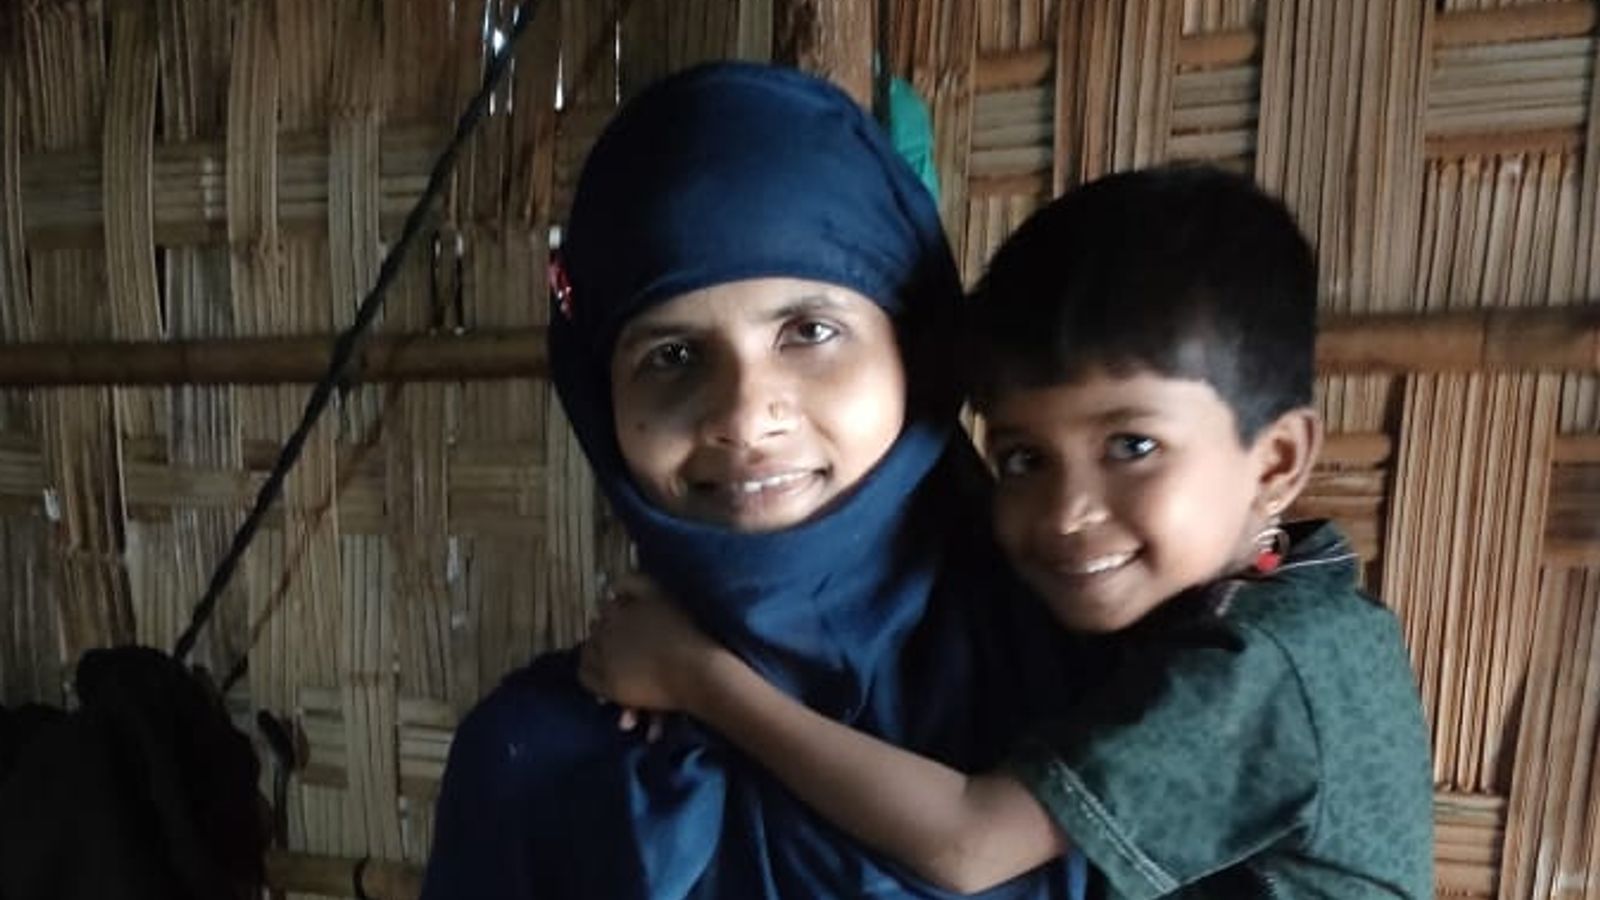 Rohingya mother and daughter rescued after being adrift on boat for almost a month